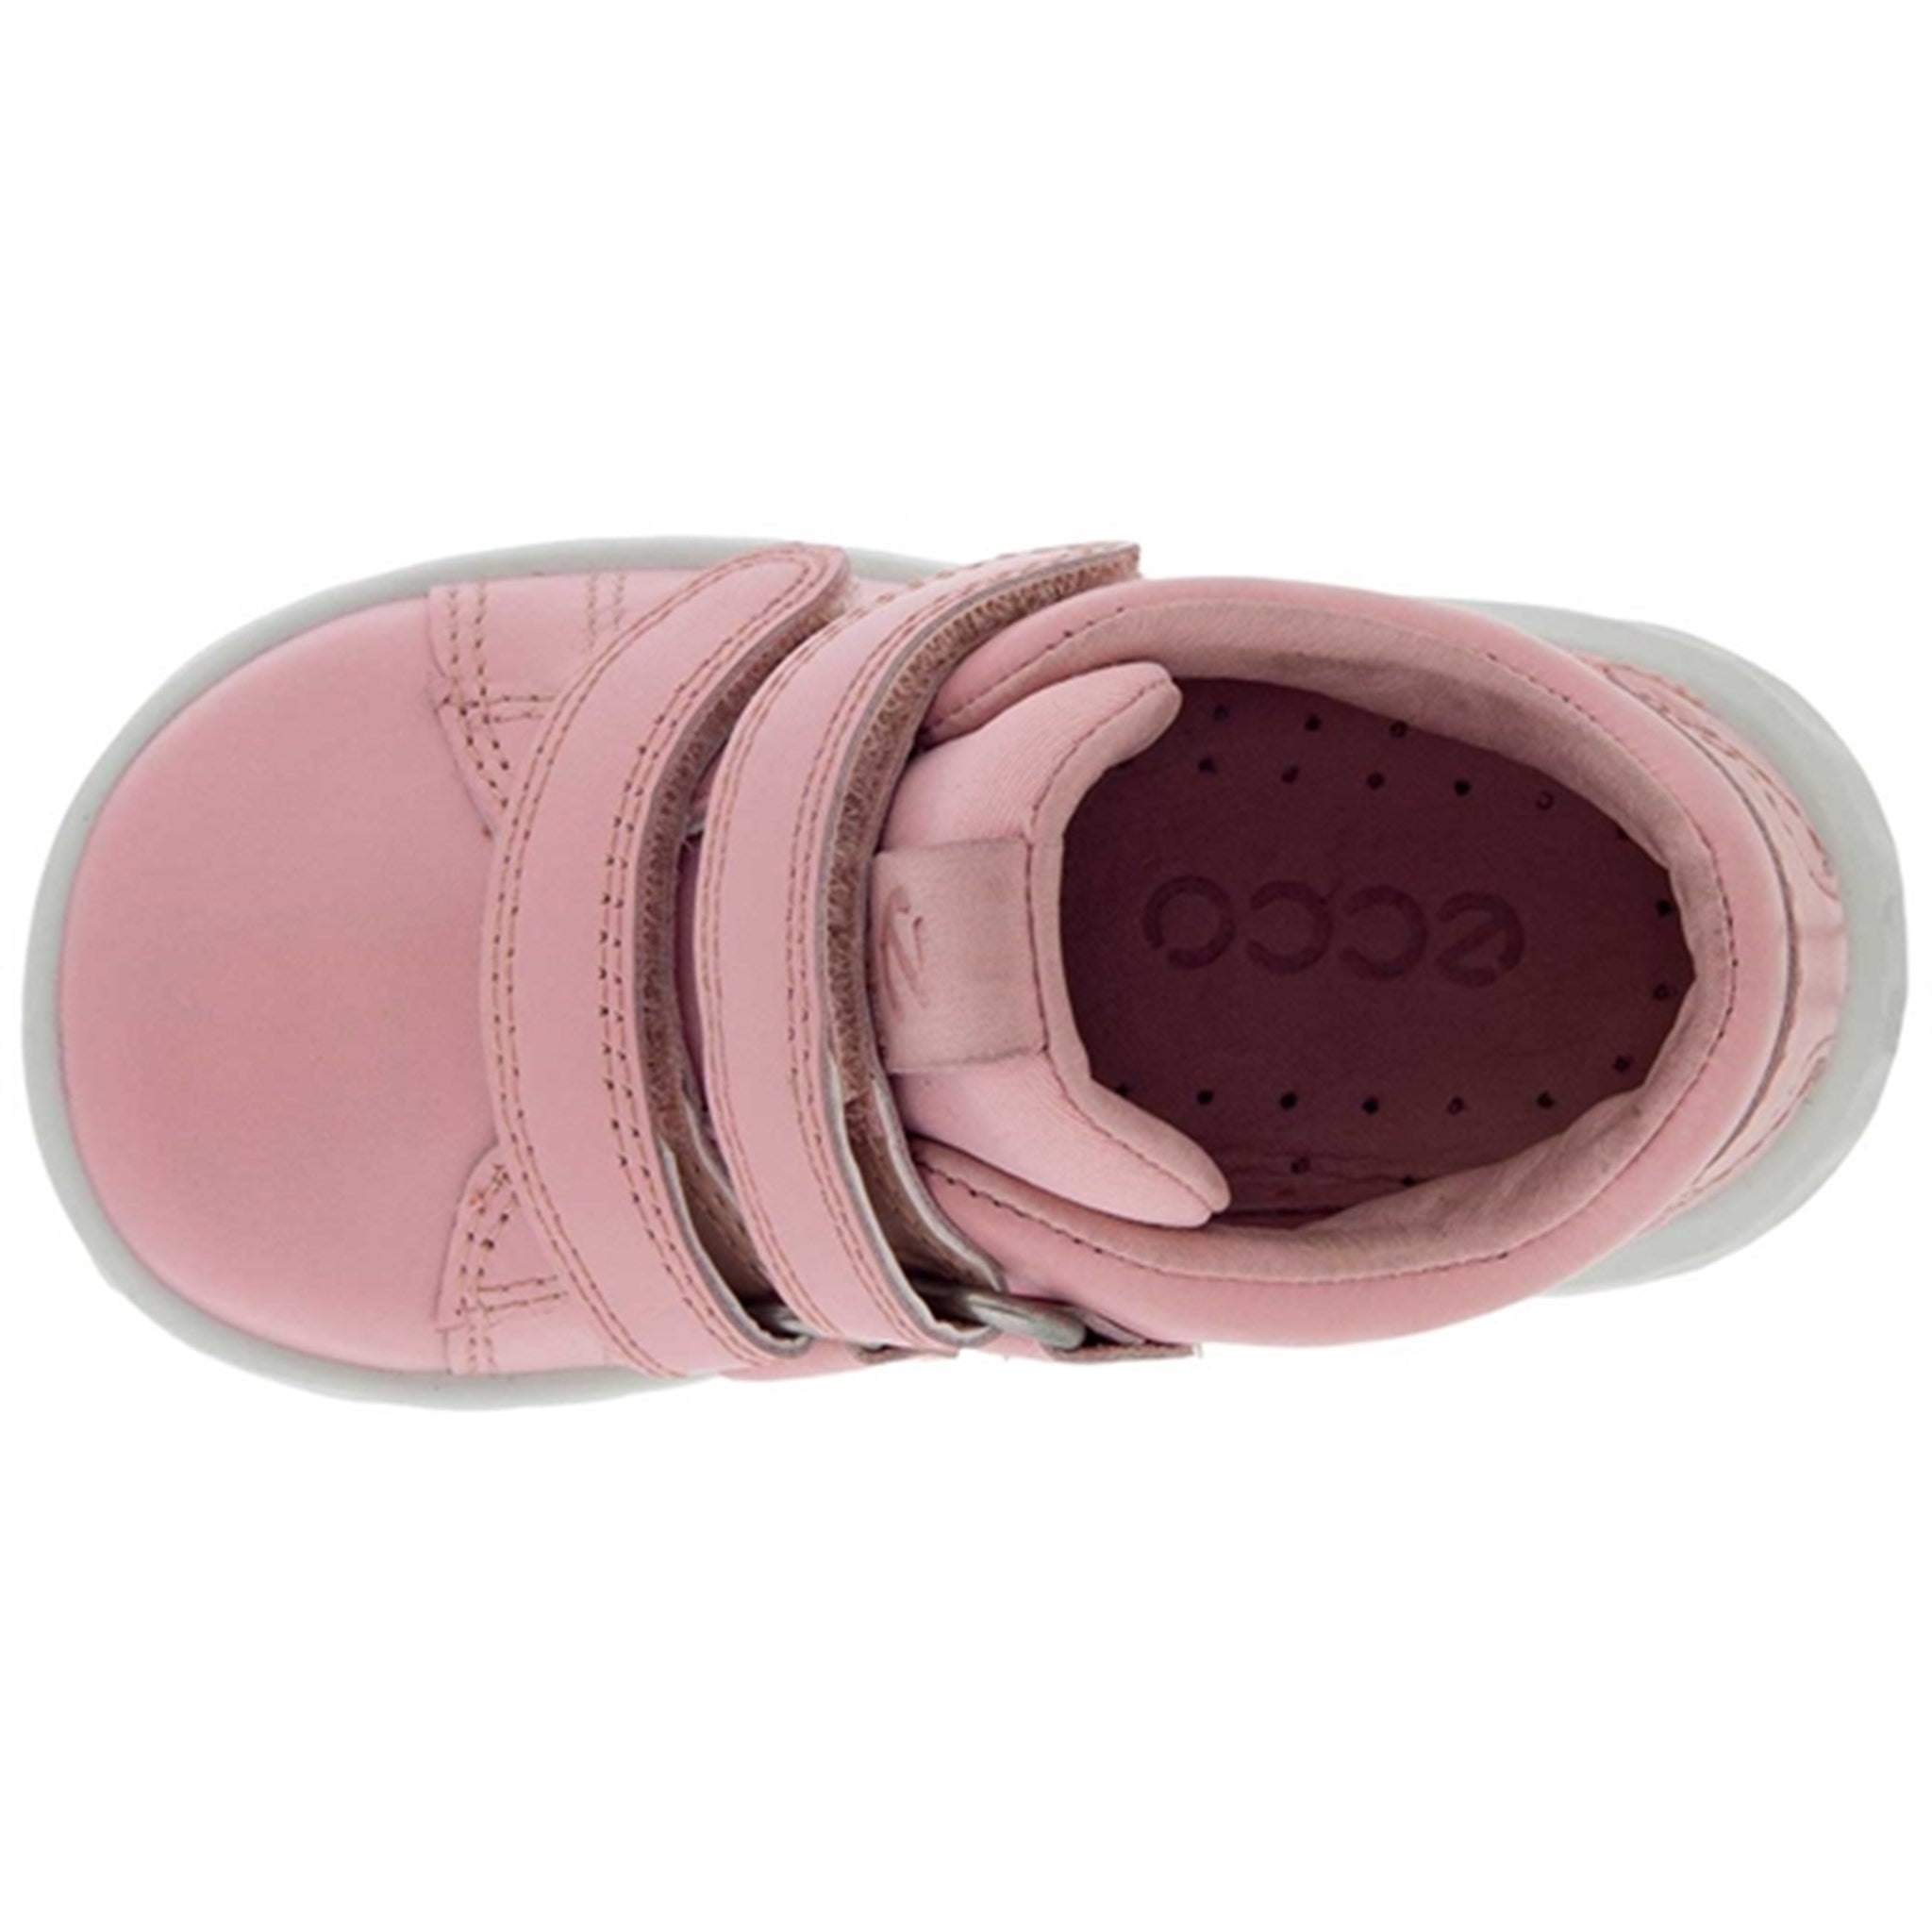 Ecco Lite Infant Silver Pink Shoes 4